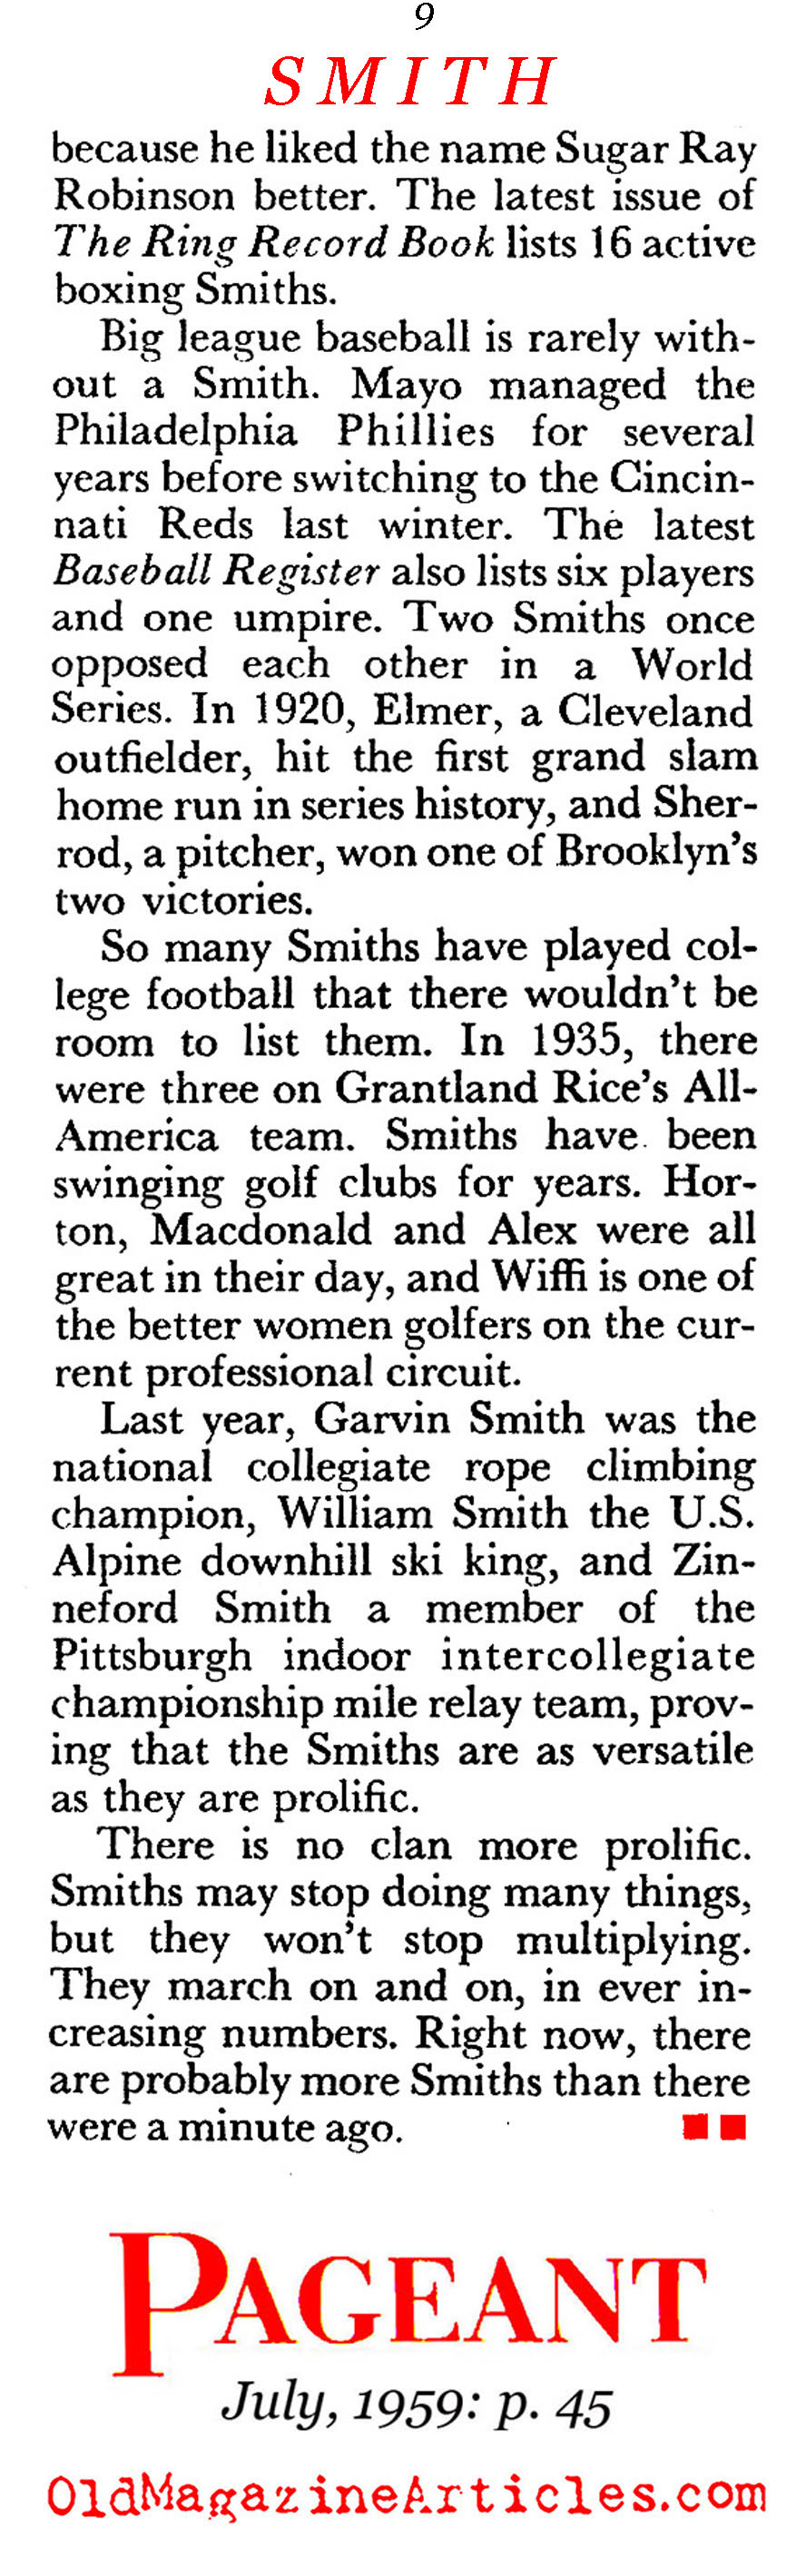 The Smiths in America (Pageant Magazine, 1959)